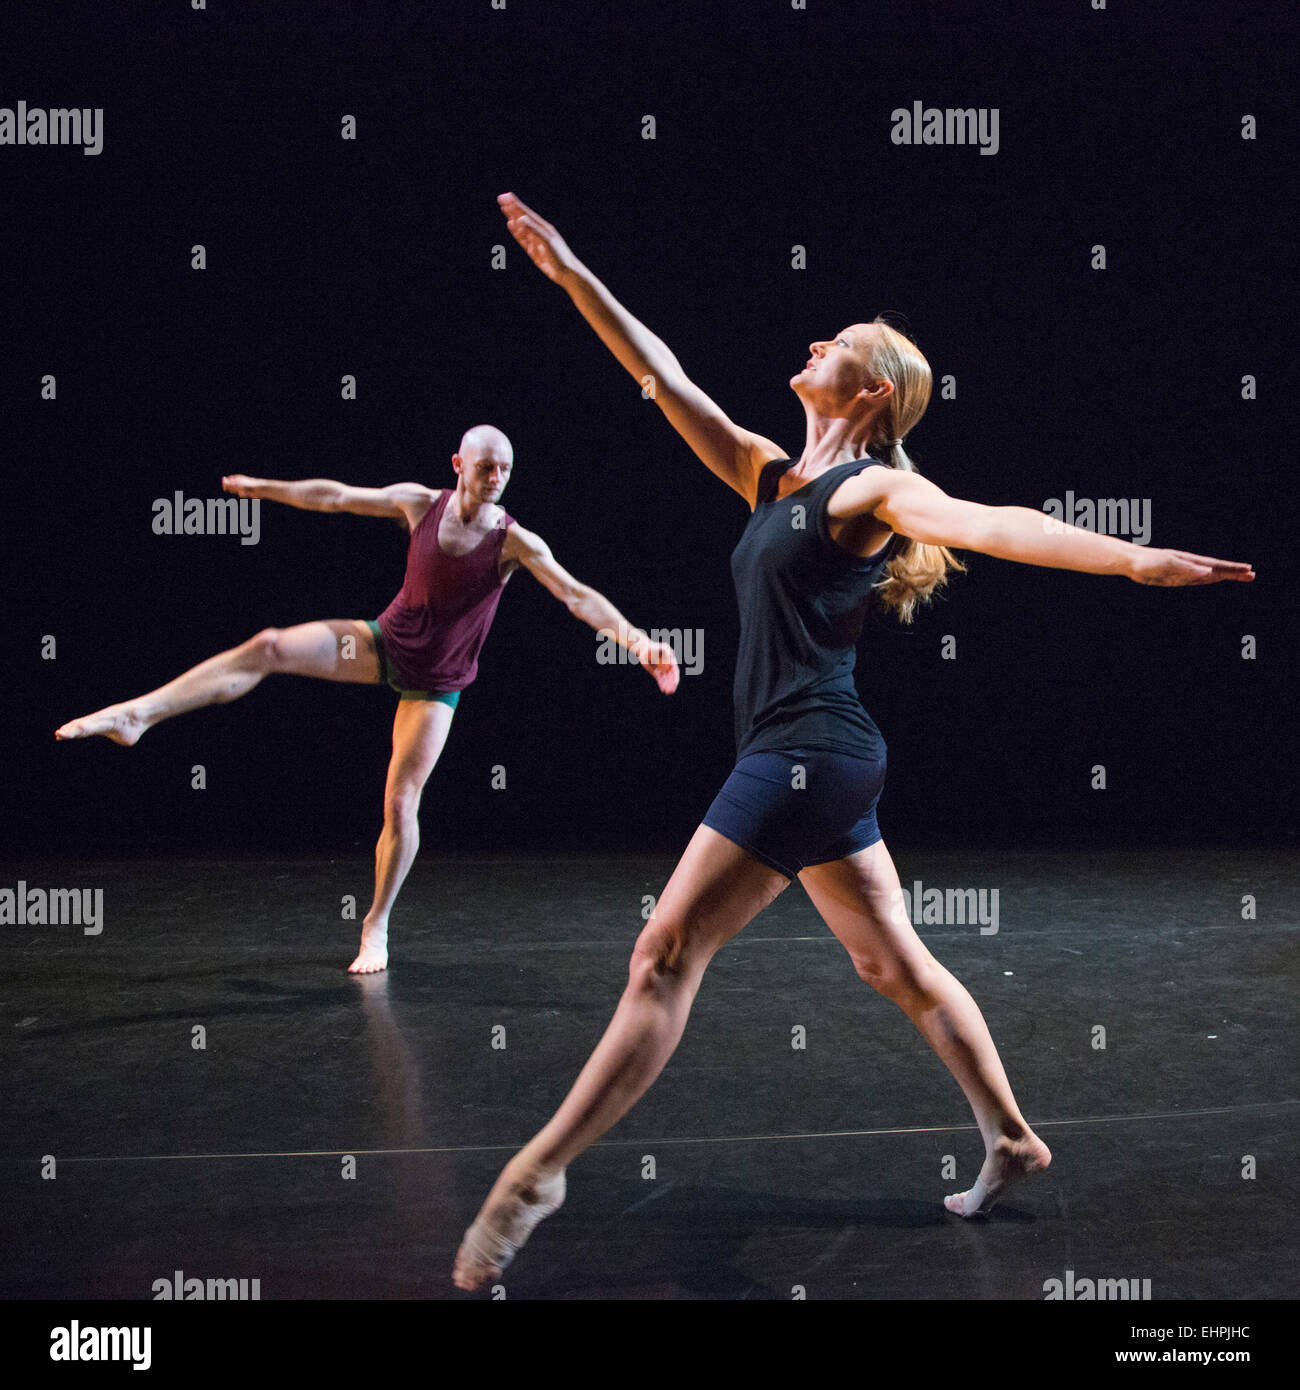 © Licensed to London News Pictures. 10/03/2015. London, England. Phil Sanger and Yolande Yorke-Edgell performing. The Yorke Dance Project presents 'Lingua Franca', the first new work in a decade from choreographer Robert Cohan CBE, on 10 March 2015 at the Lilian Baylis Studio and as part of Robert Cohan's 90th birthday at The Place on 27 March. Lingua Franca is part of the company's spring programme 'Figure Ground 2015'. Dancers: Jonathan Goddard, Phil Sanger, Laurel Dalley-Smith and Yolande Yorke-Edgell. Stock Photo